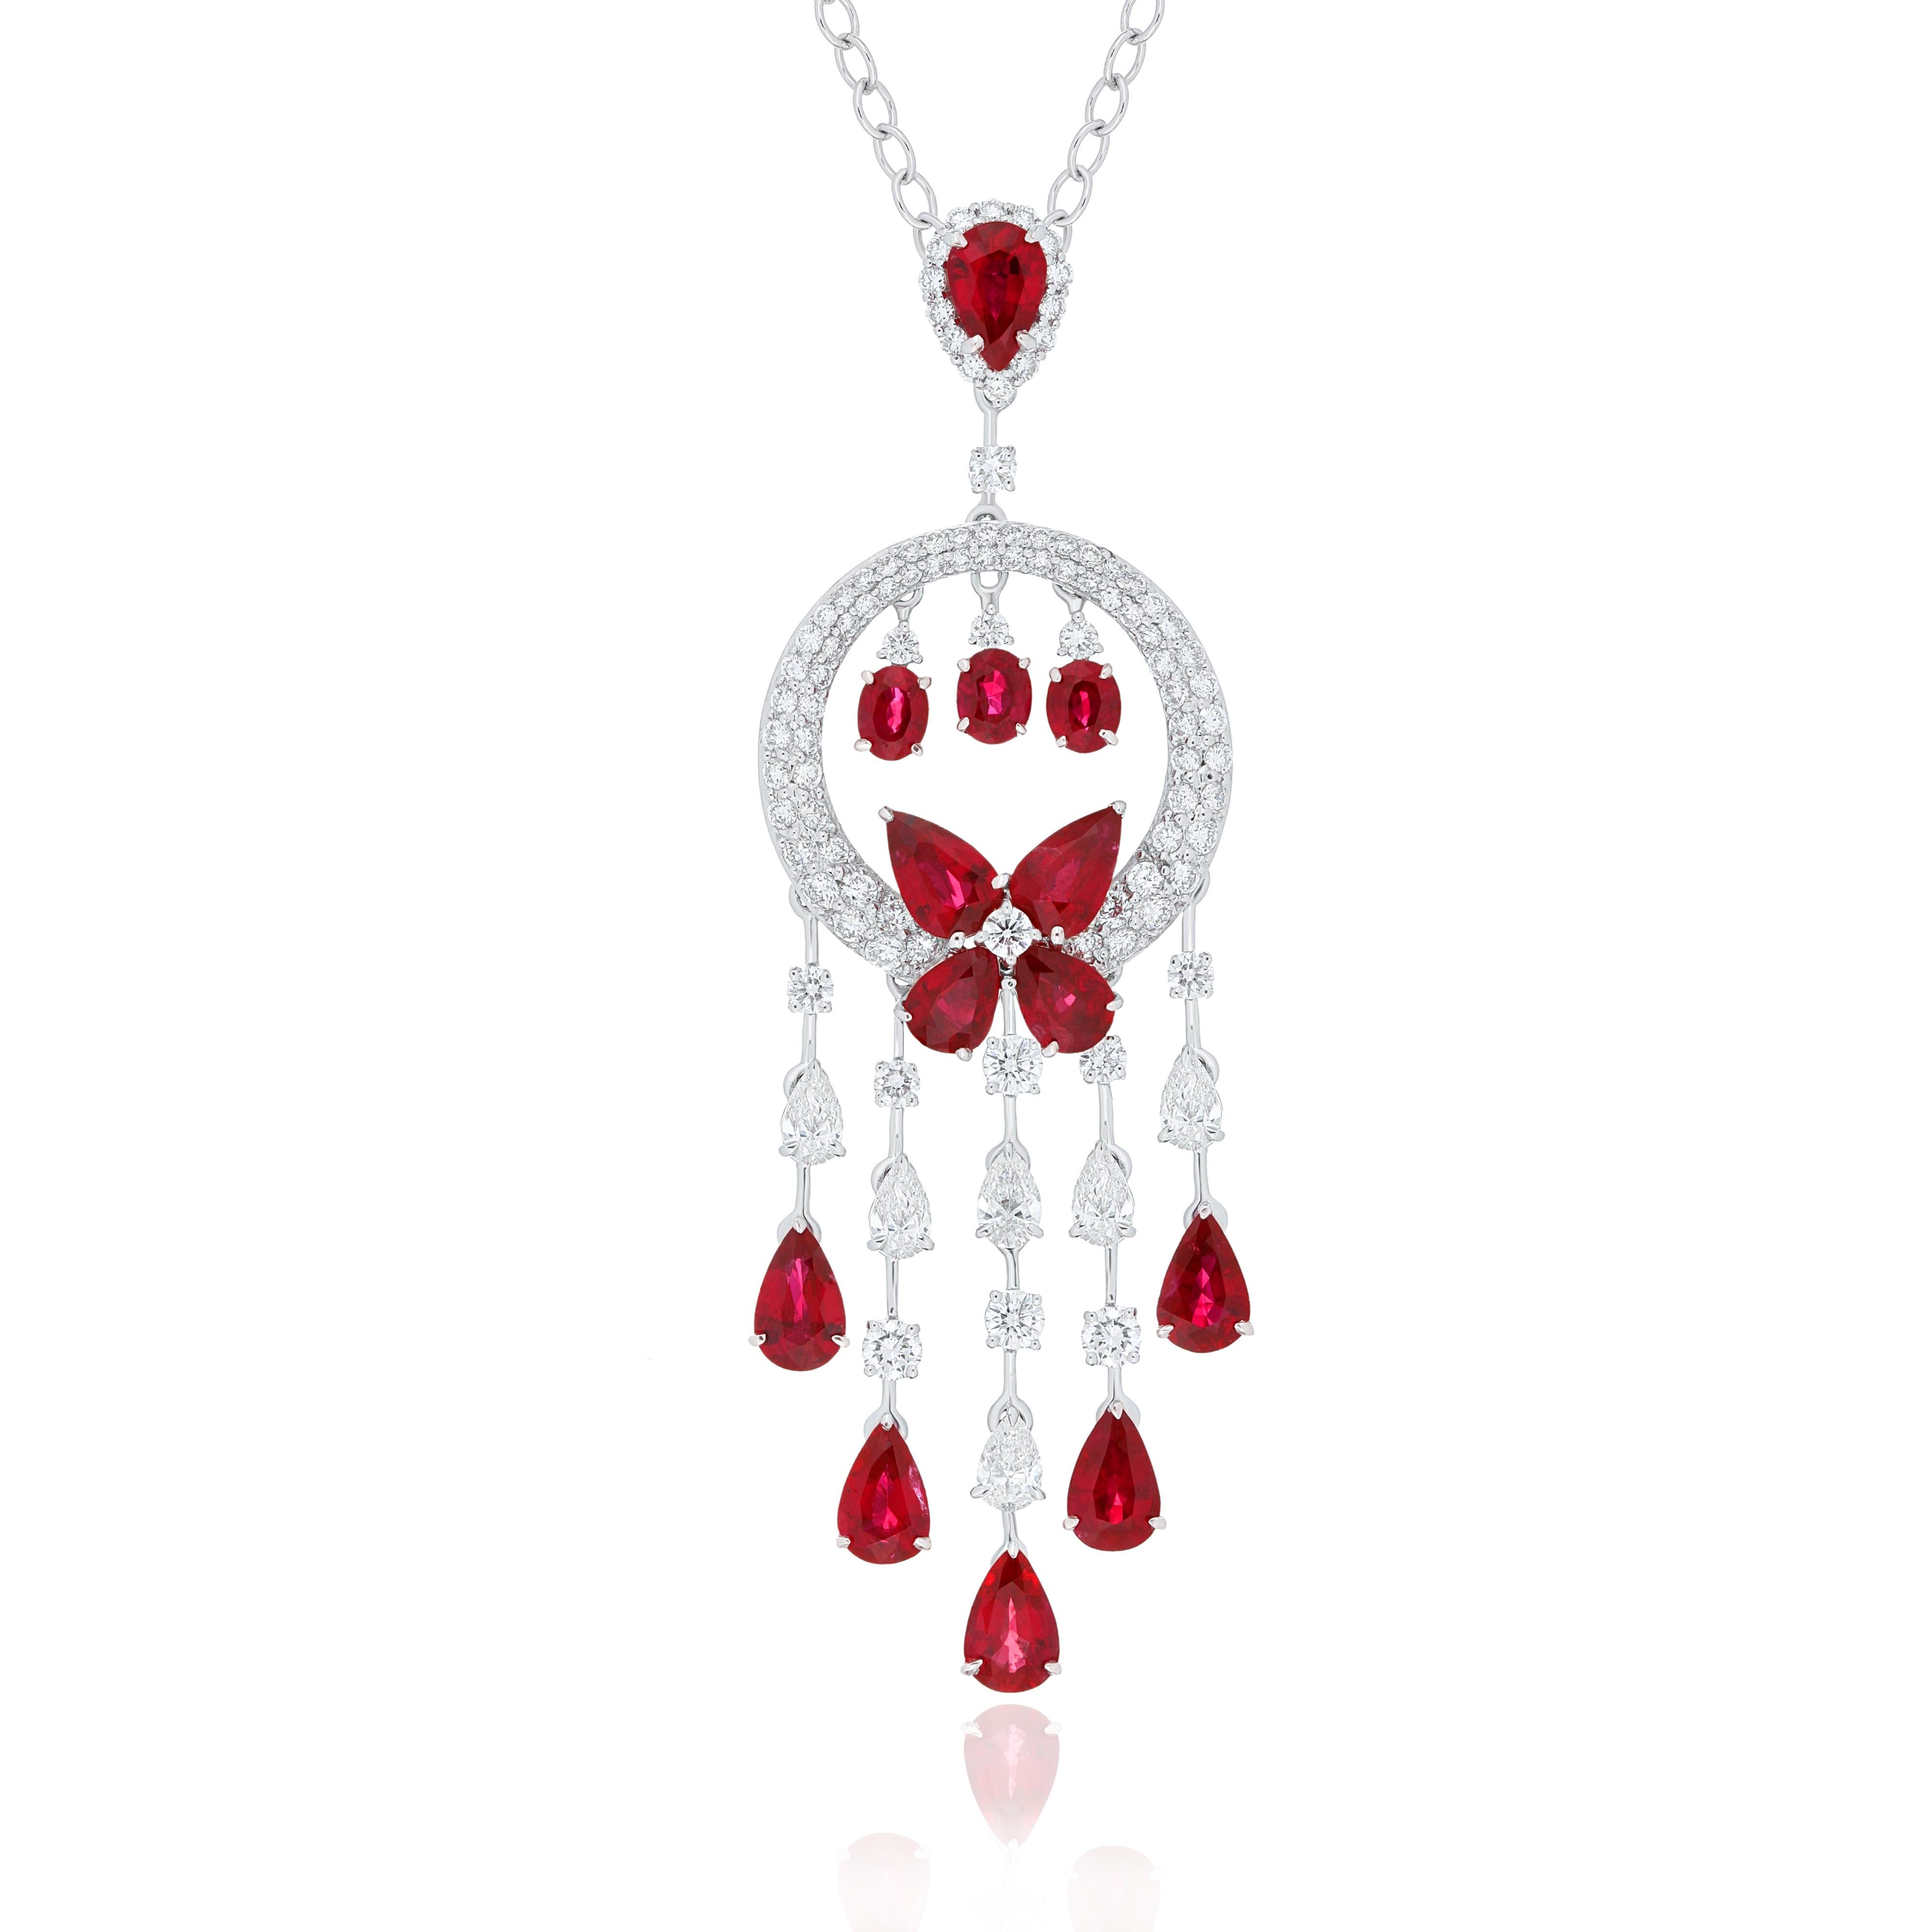 Elegant and exquisitely detailed 18 Karat White Gold Necklace, center set with 3.11Cts .Pear Shape Ruby Mozambique and micro pave set Diamonds, weighing approx. 1.79Cts. Beautifully Hand crafted in 18 Karat White Gold.

Stone Detail:
Ruby